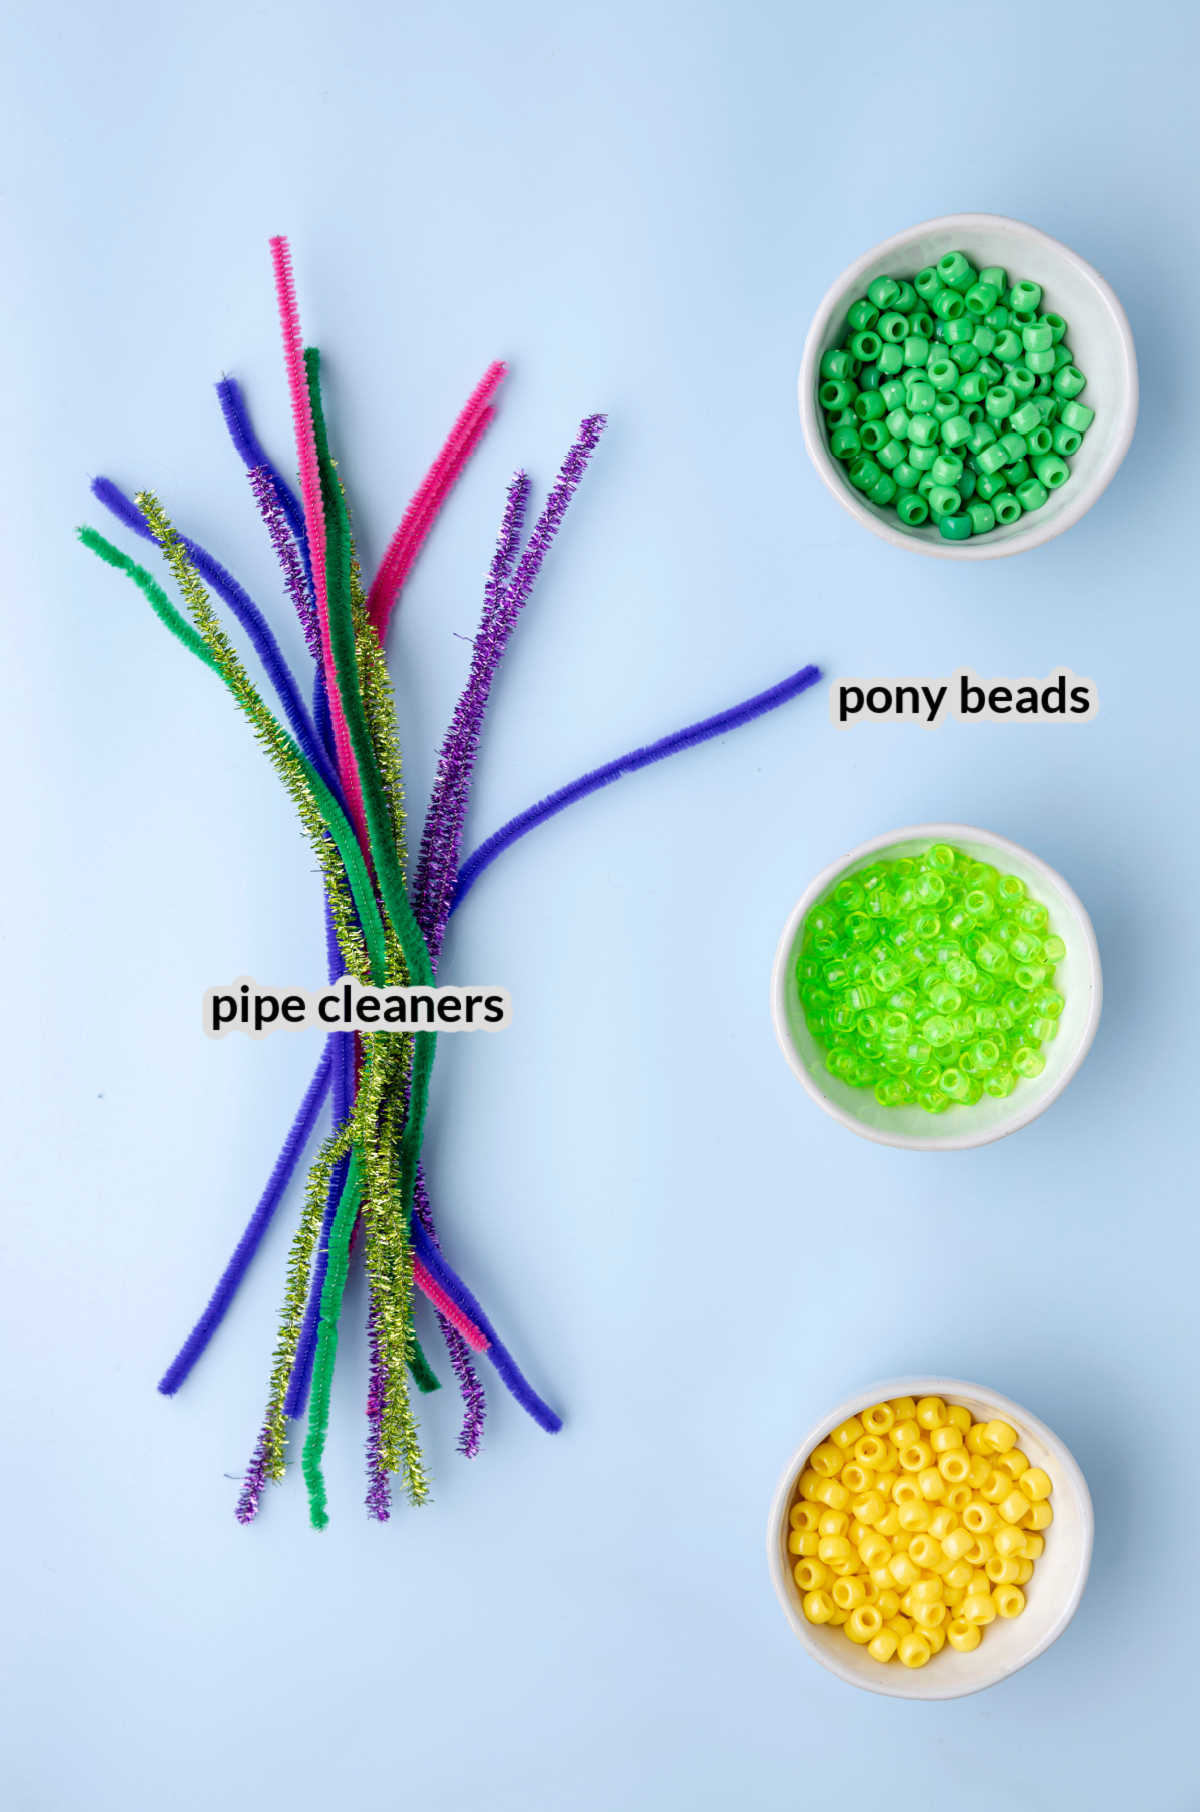 Overhead Image of the Pipe Cleaner Flowers Supplies